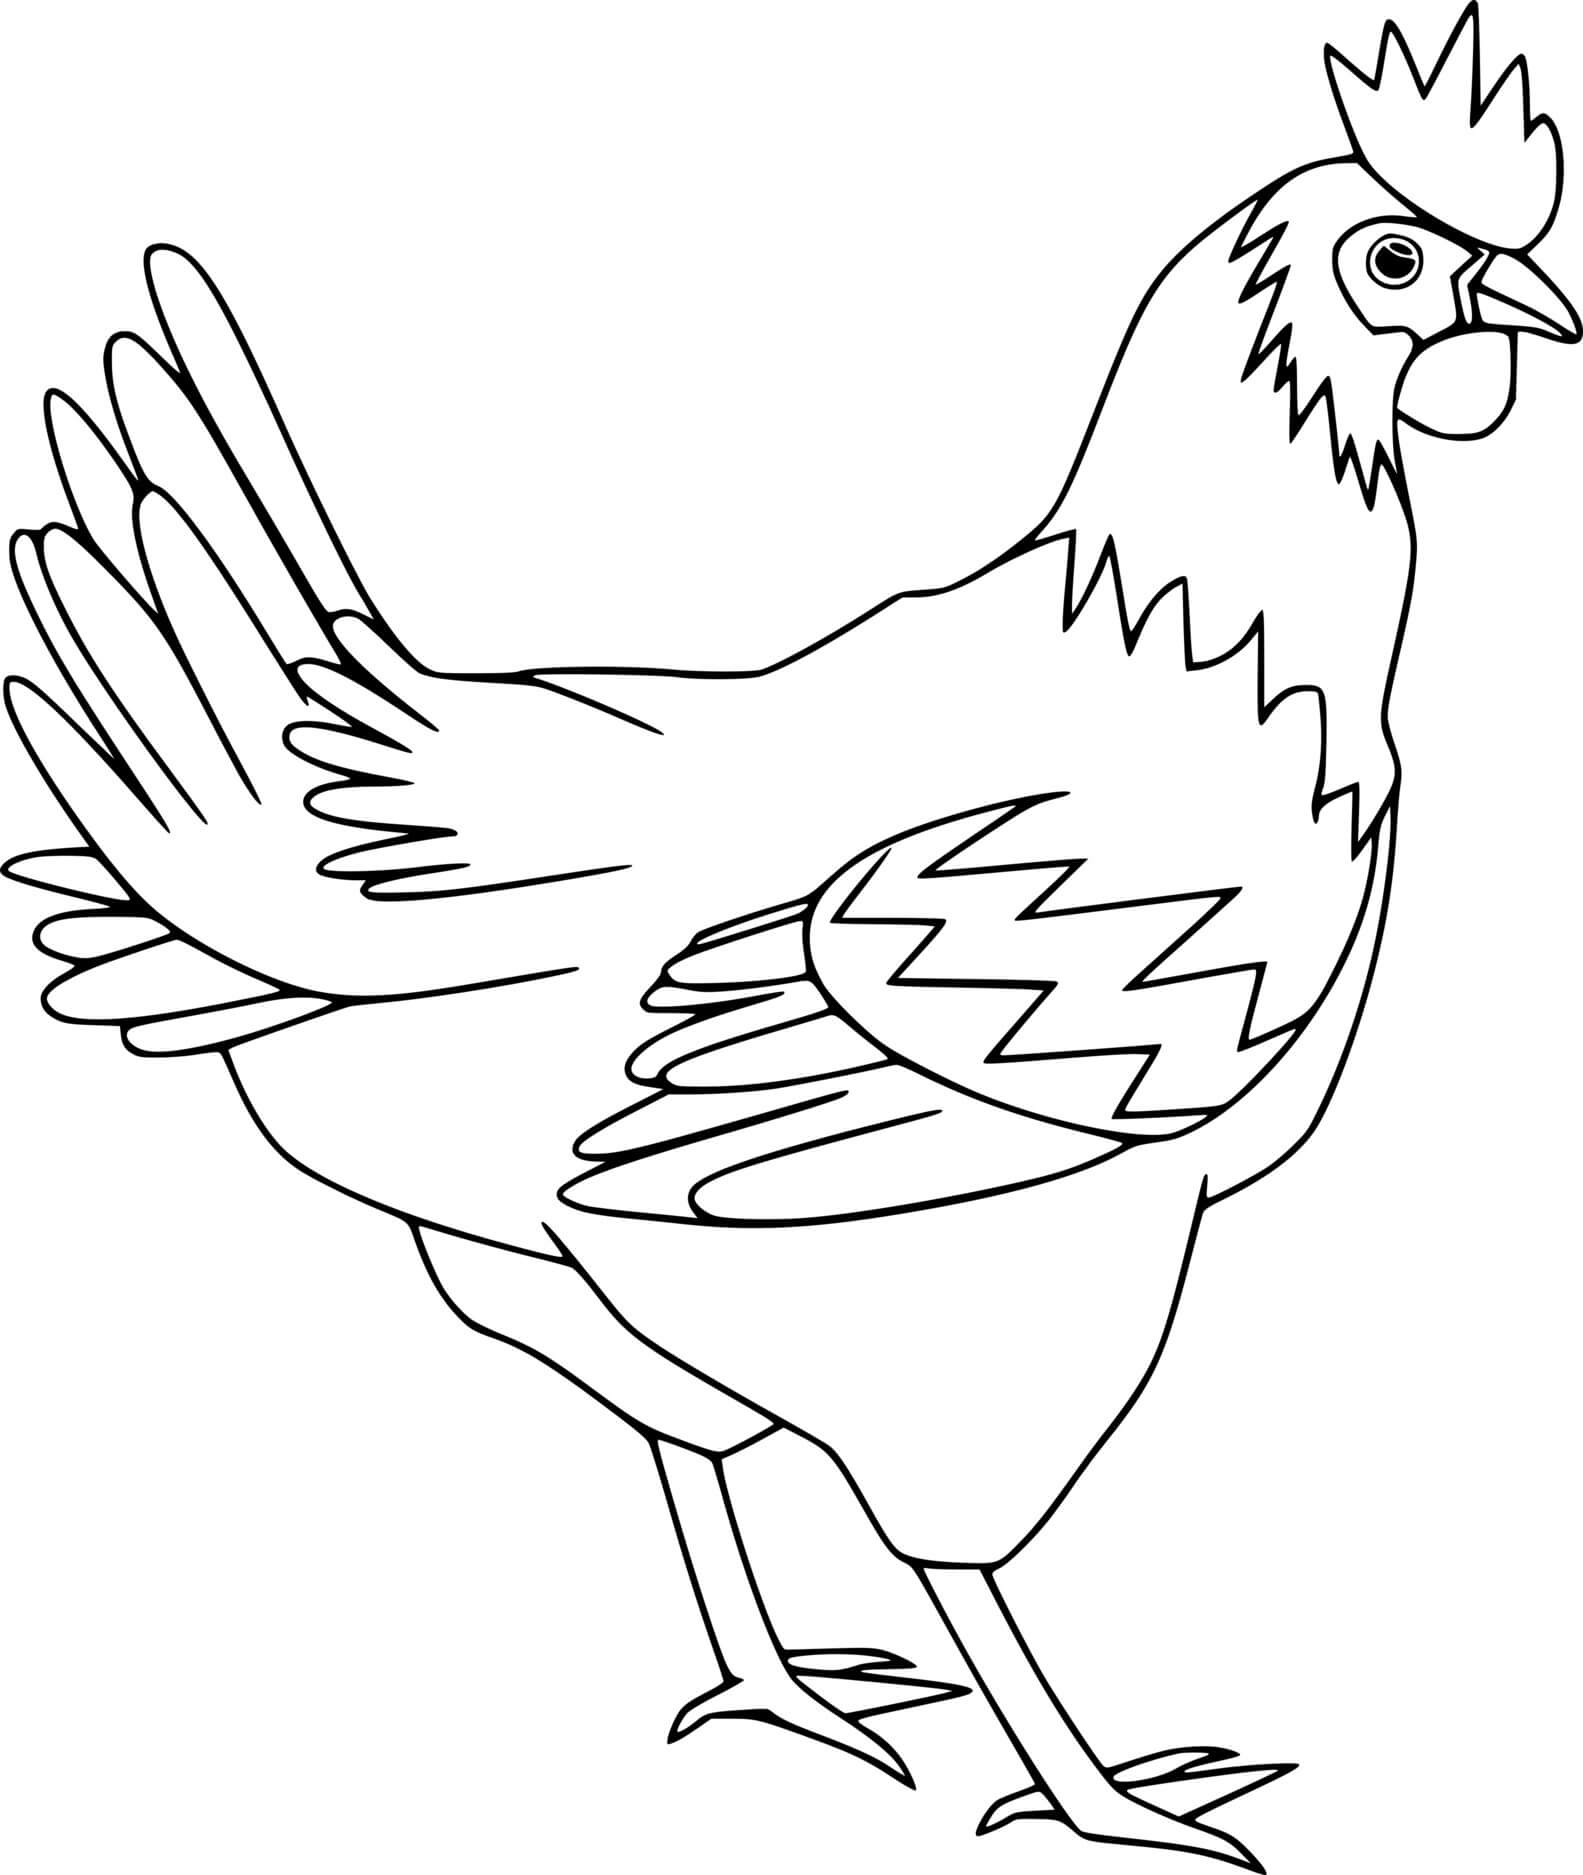 Simple Walking Chicken Coloring Page